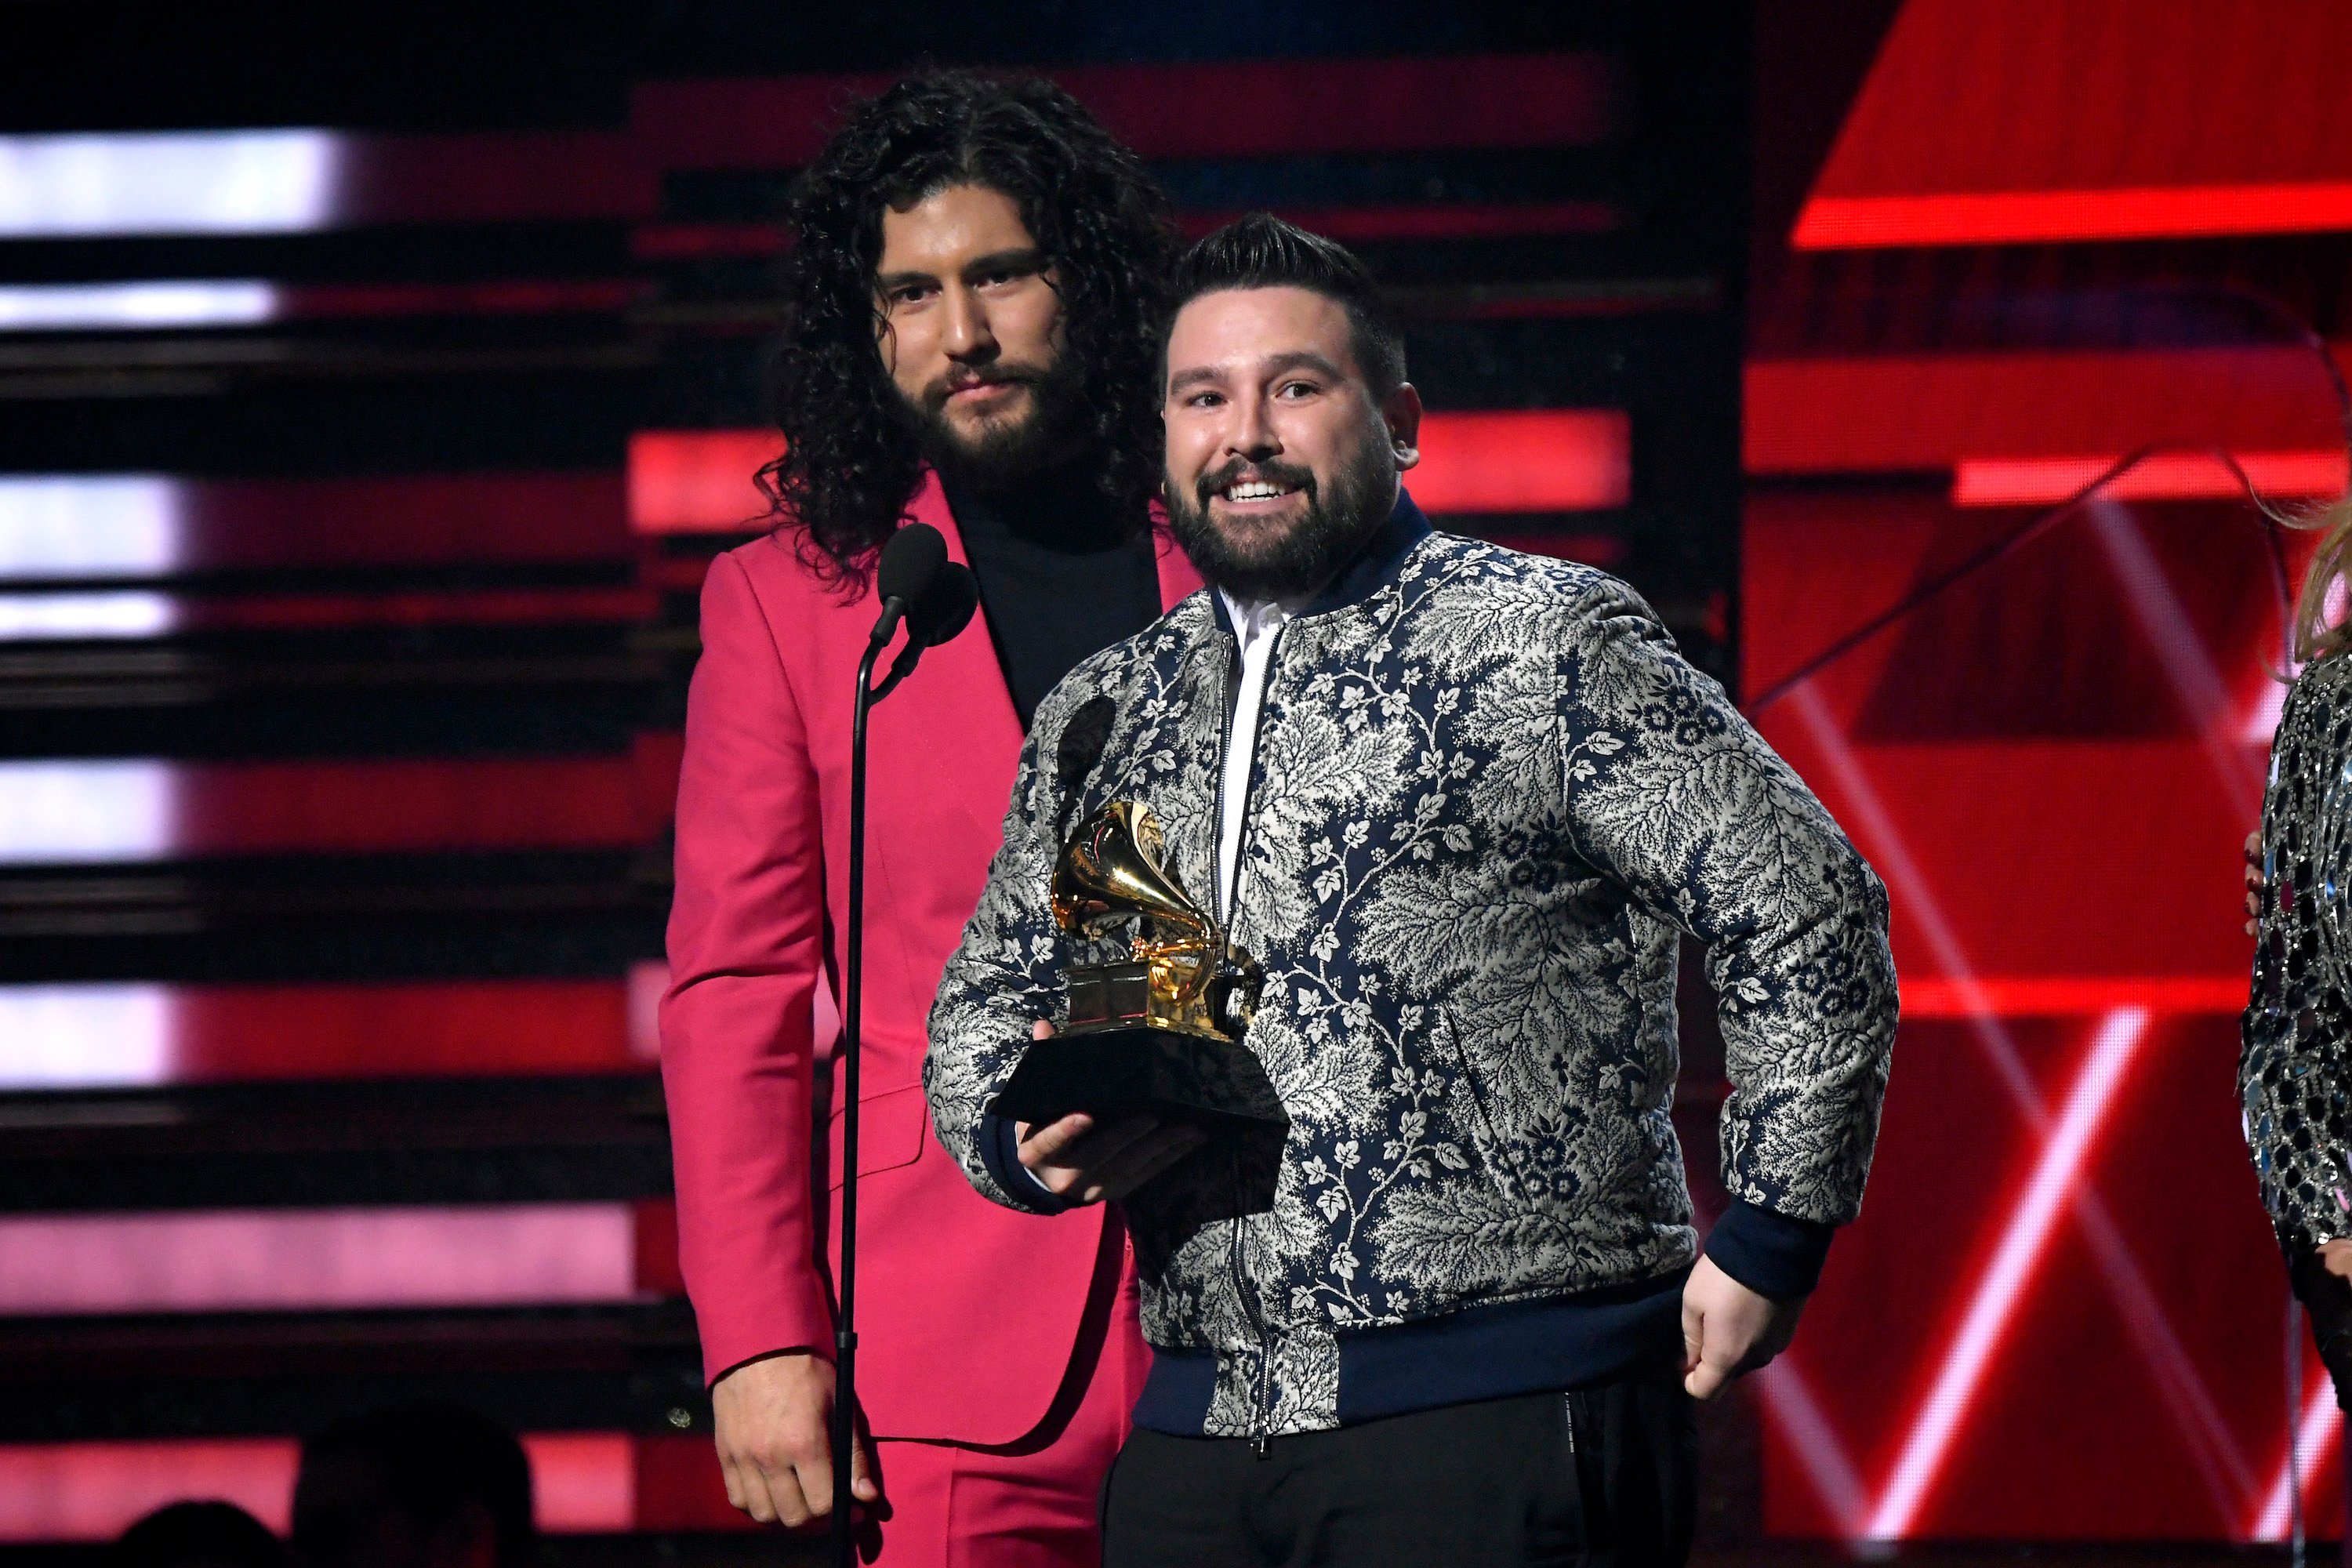 Dan Smyers and Shay Mooney of music group Dan + Shay accept the Best Country Duo/Group Performance award for 'Speechless' during the 62nd Annual GRAMMY Awards